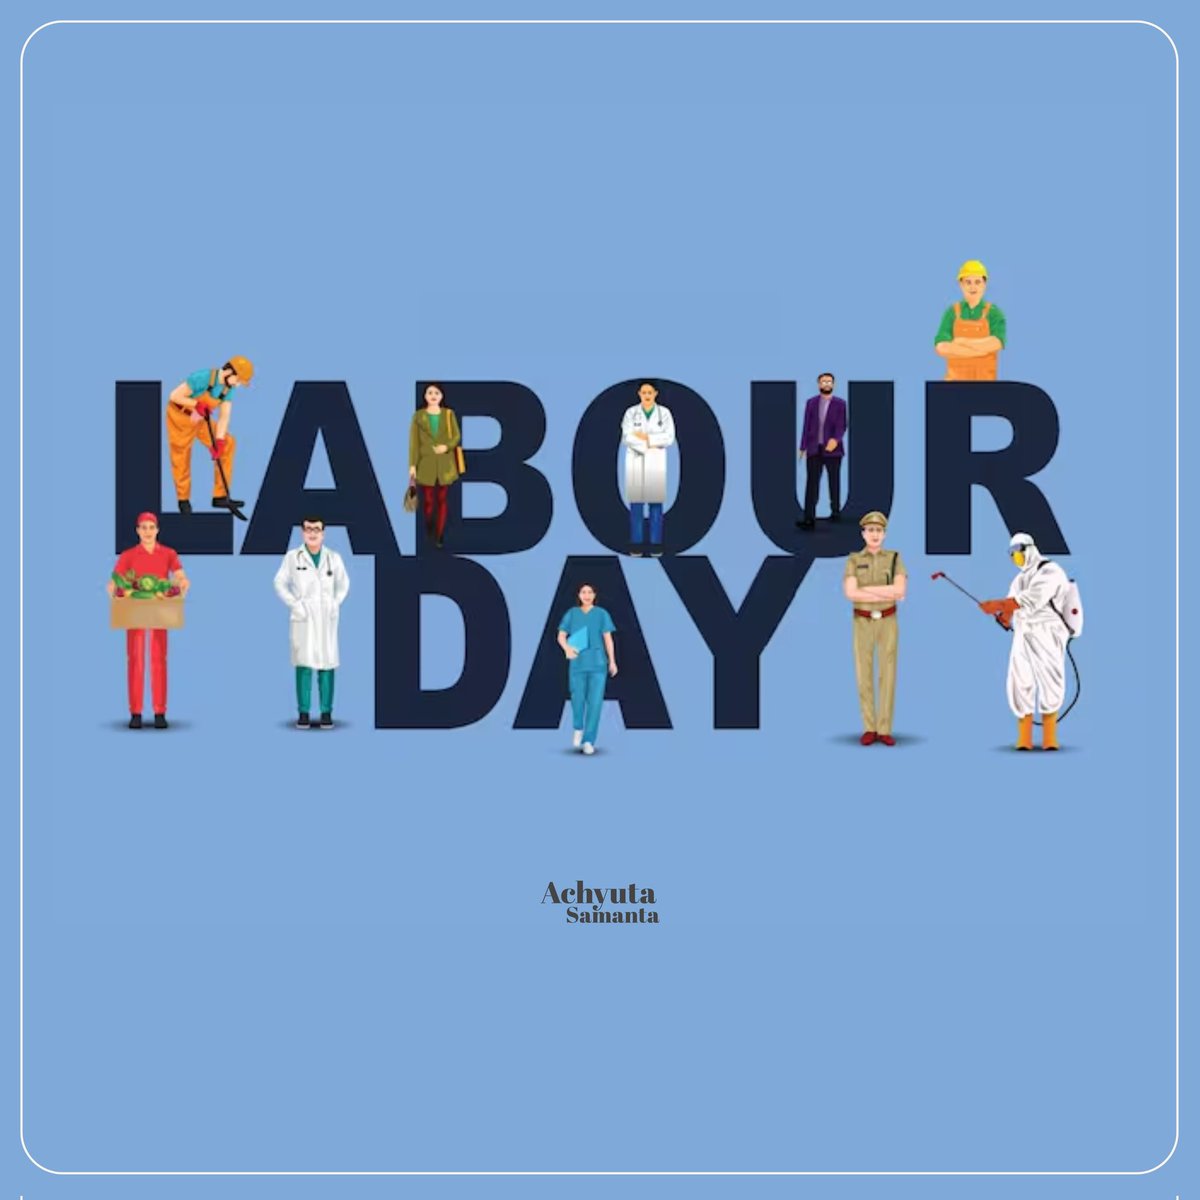 On this Labour Day, let us salute the hard work & dedication of every worker who contributes to building a better future. Their tireless efforts & commitment are the foundation of progress & prosperity. Let's honour & appreciate their invaluable contributions to society.